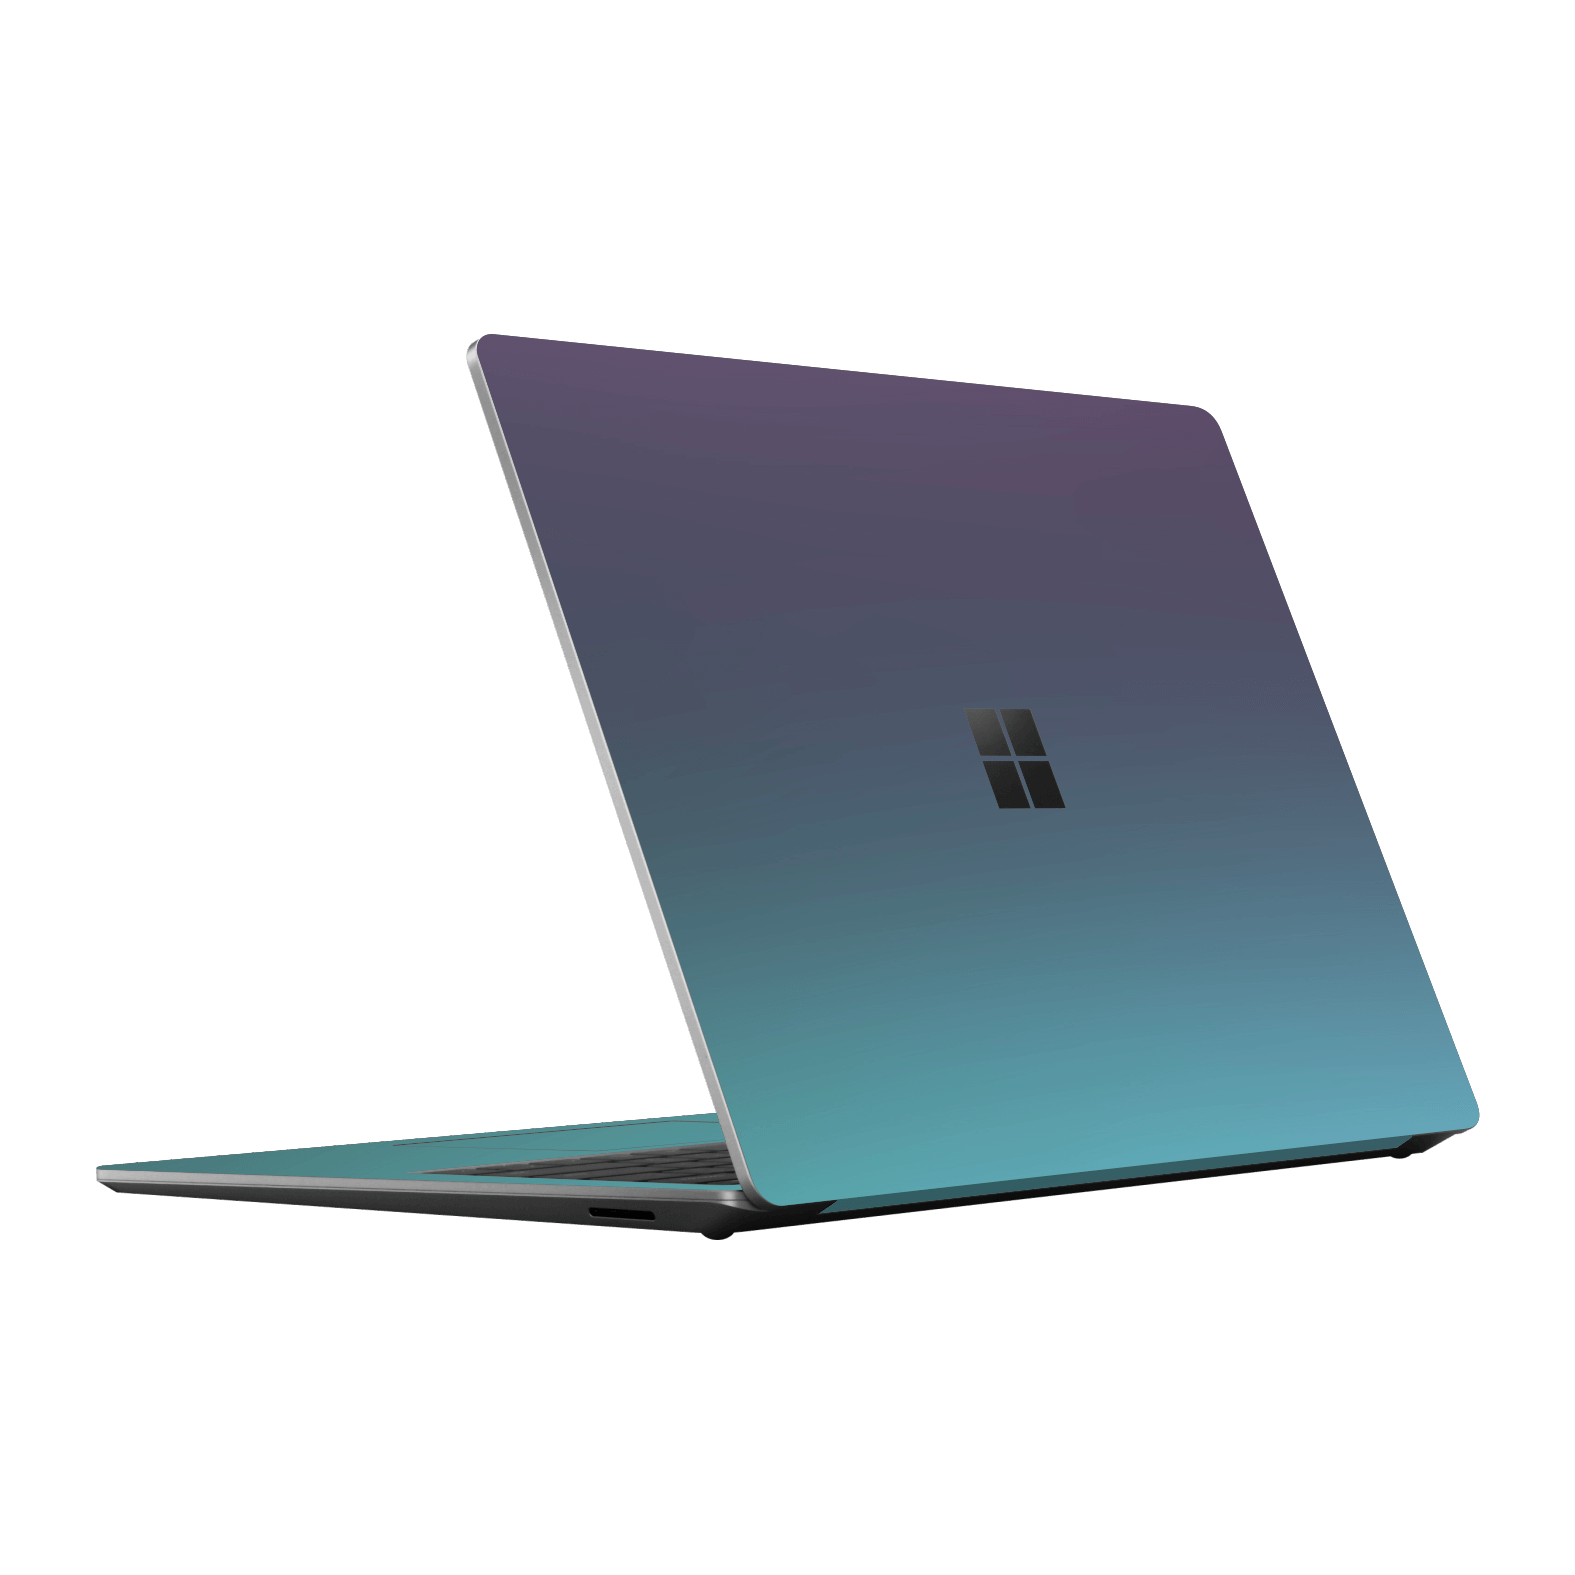 Microsoft Surface Laptop 5, 15" Chameleon Turquoise-Lavender Lilac Colour-changing Metallic Skin Wrap Sticker Decal Cover Protector by EasySkinz | EasySkinz.com